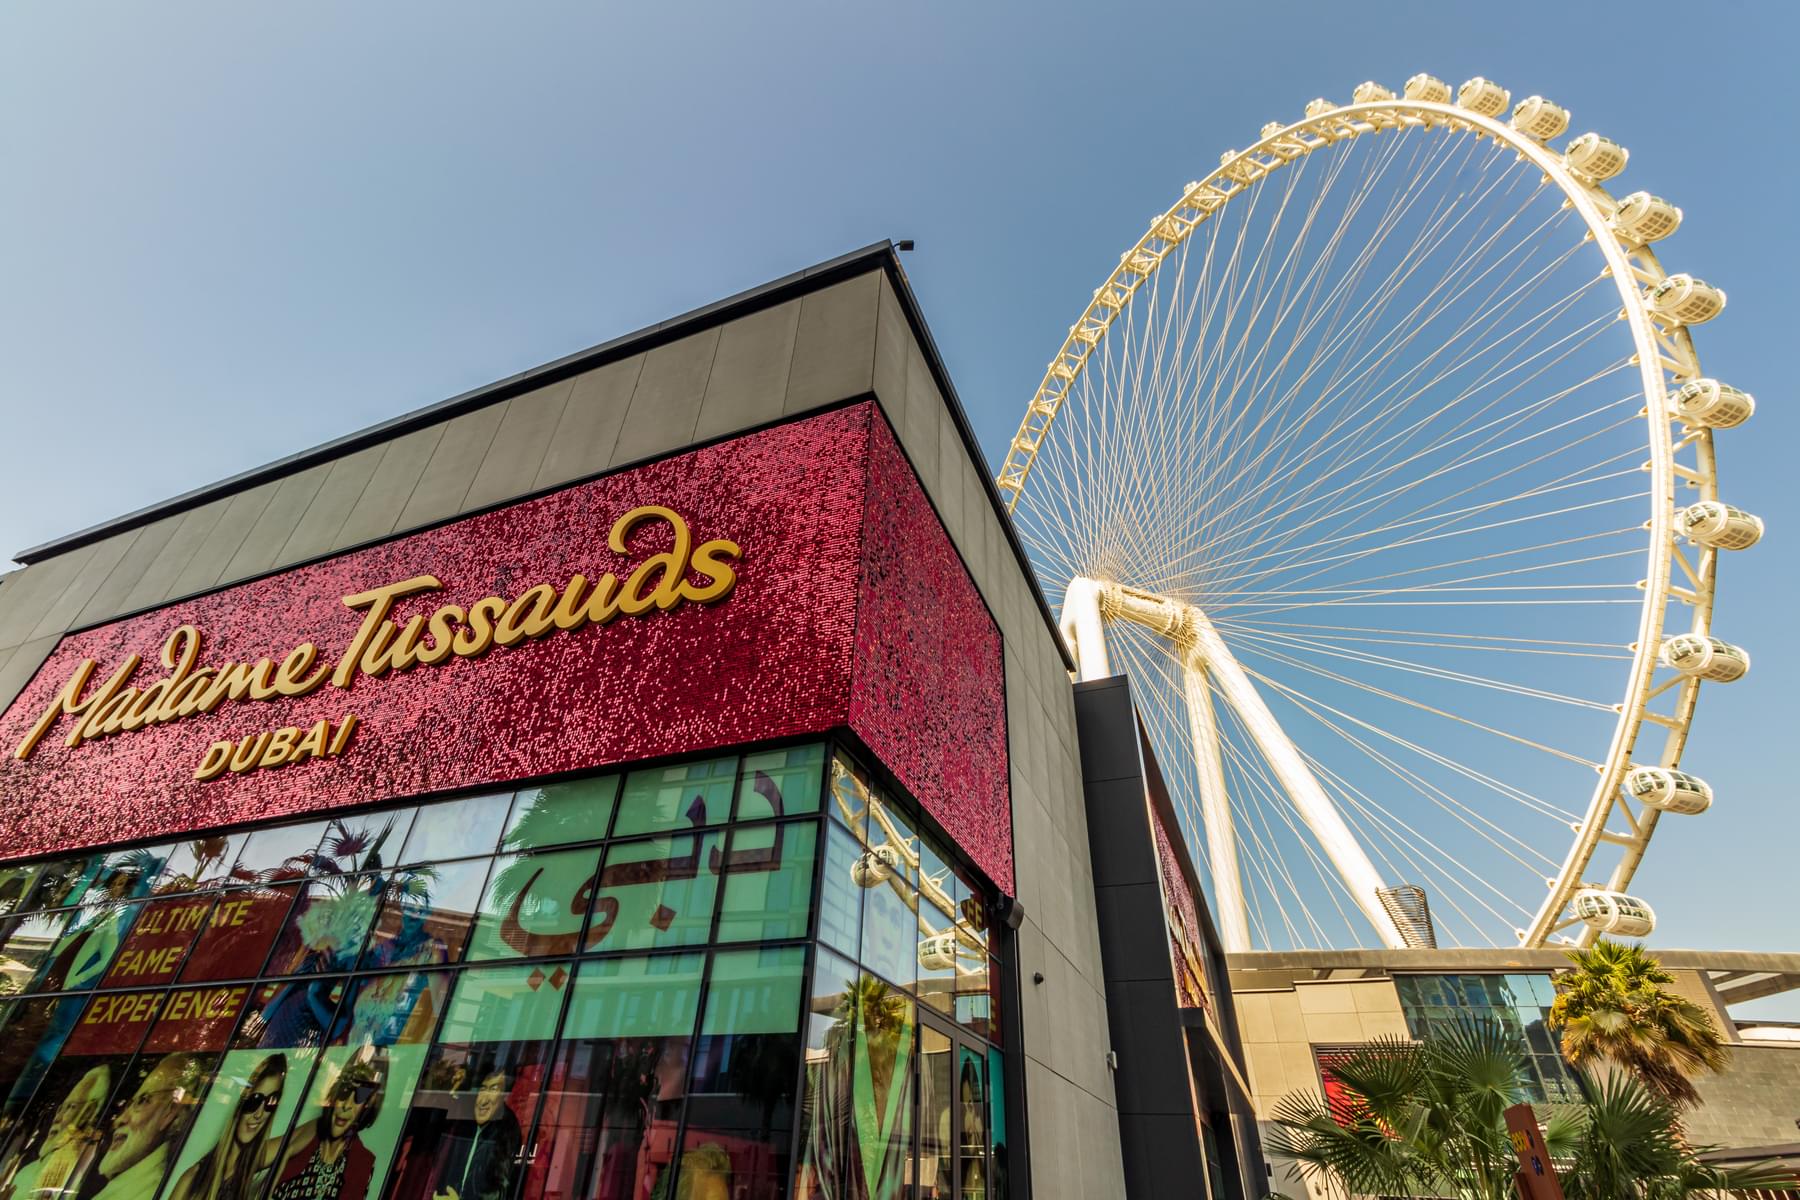  Highlights of Madame Tussauds Dubai & View at The Palm Combo Tickets